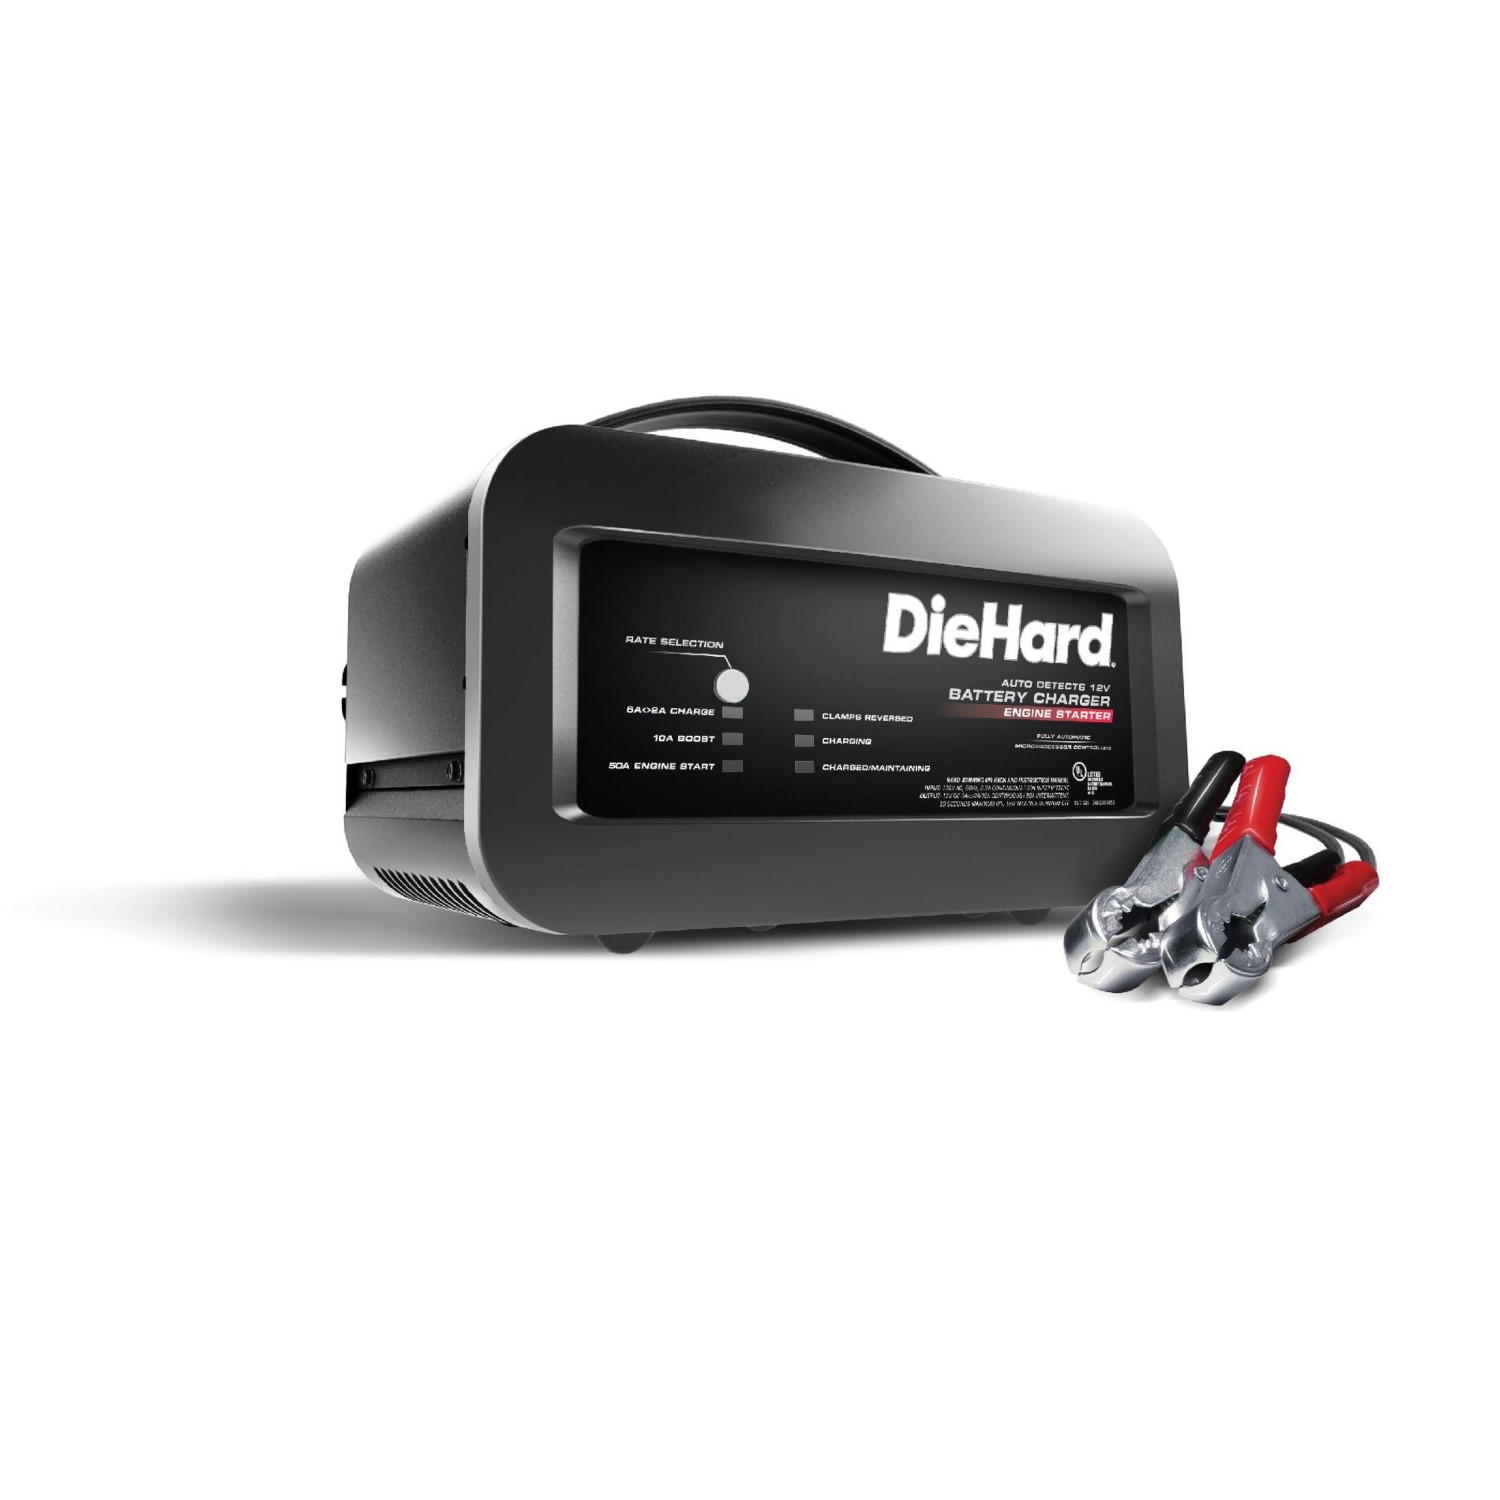 Automatic battery charger reviews